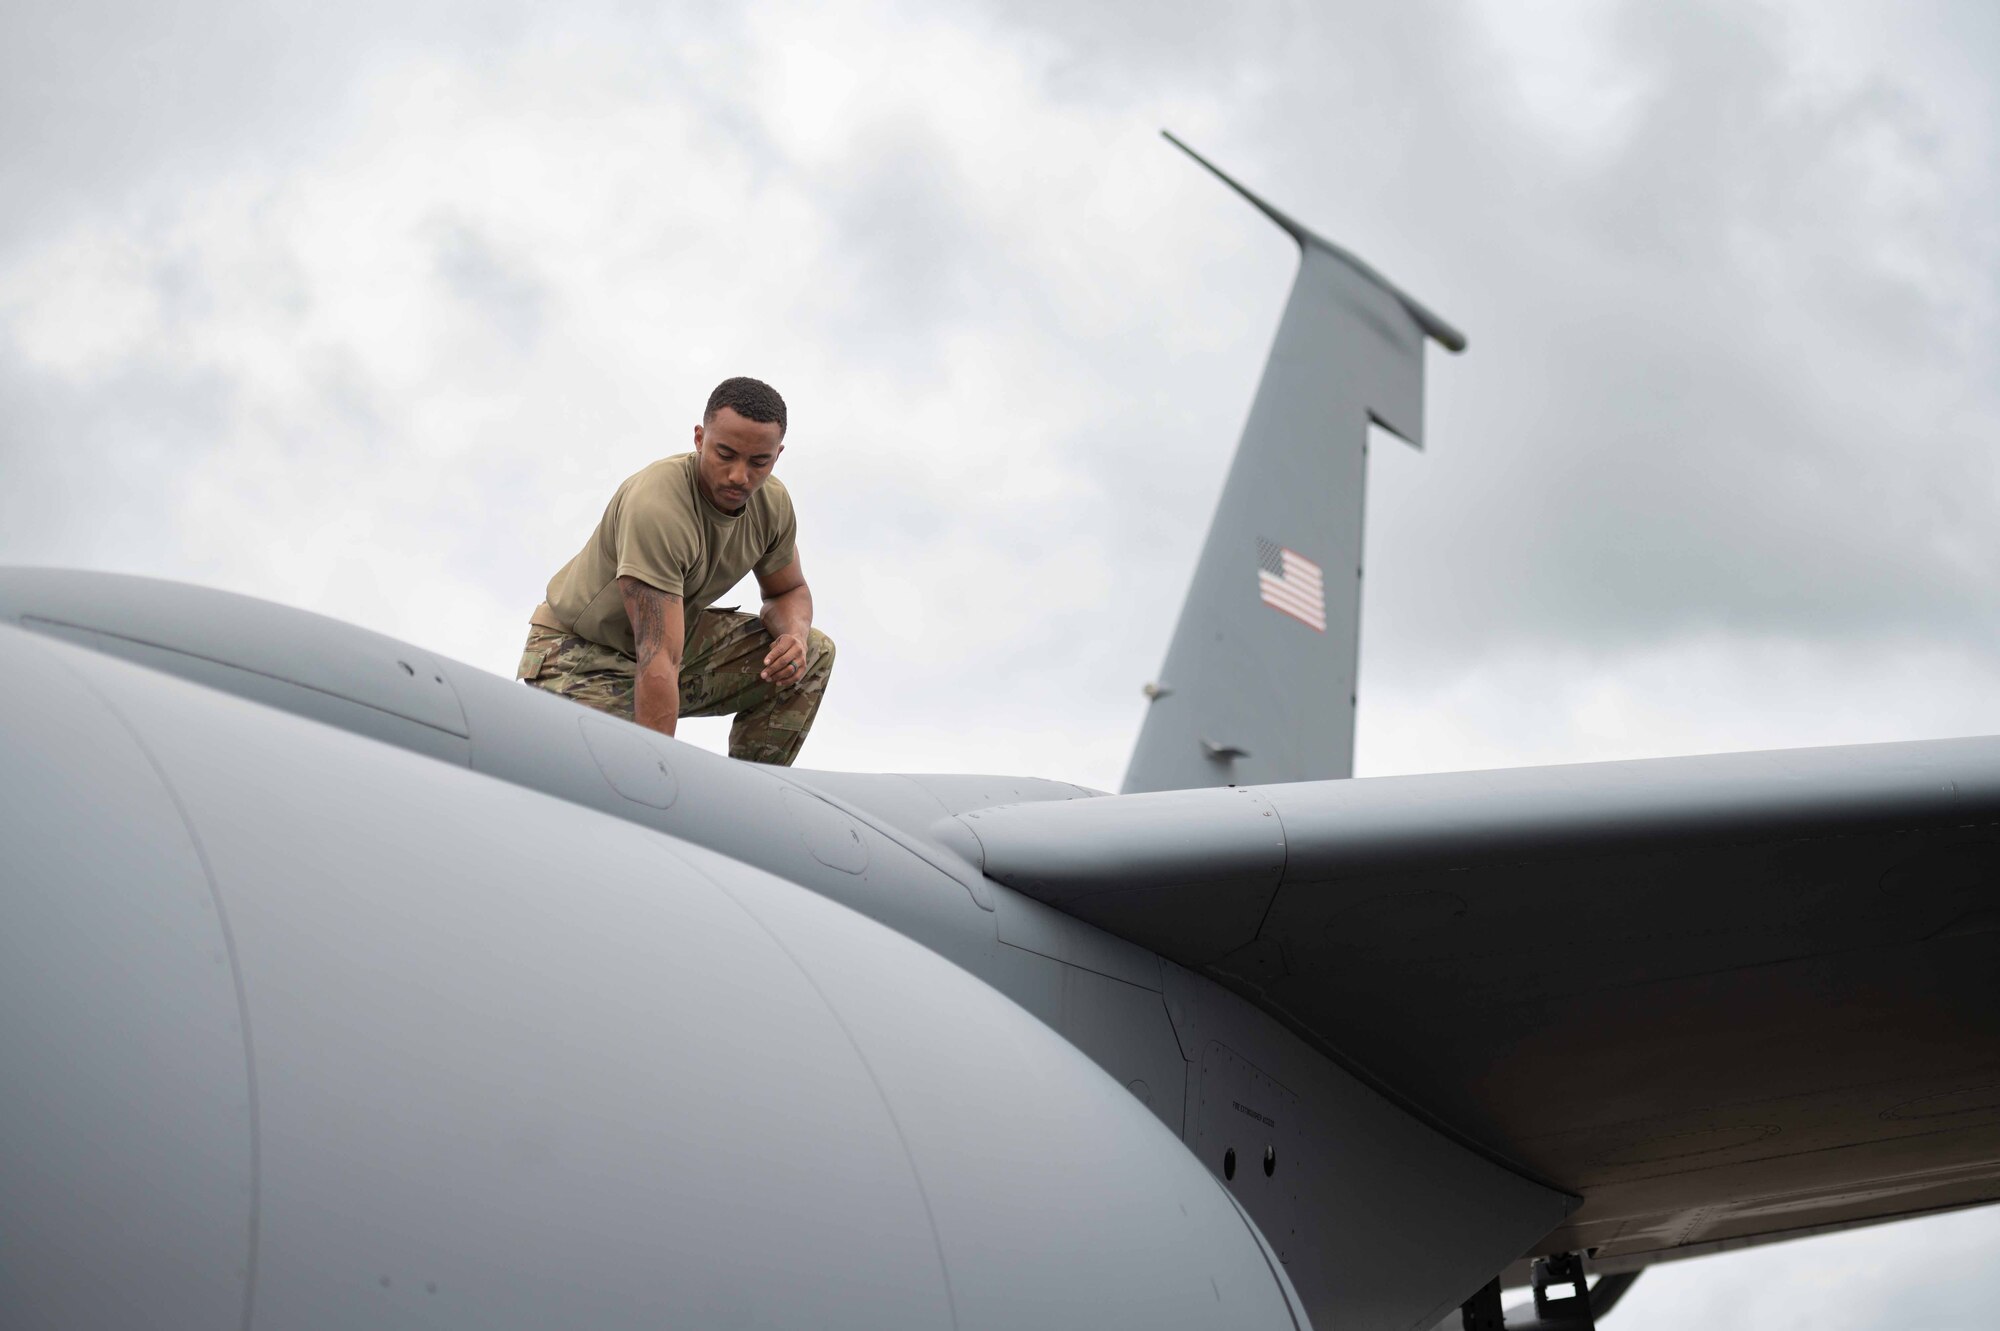 Airman inspects the top of an aircraft